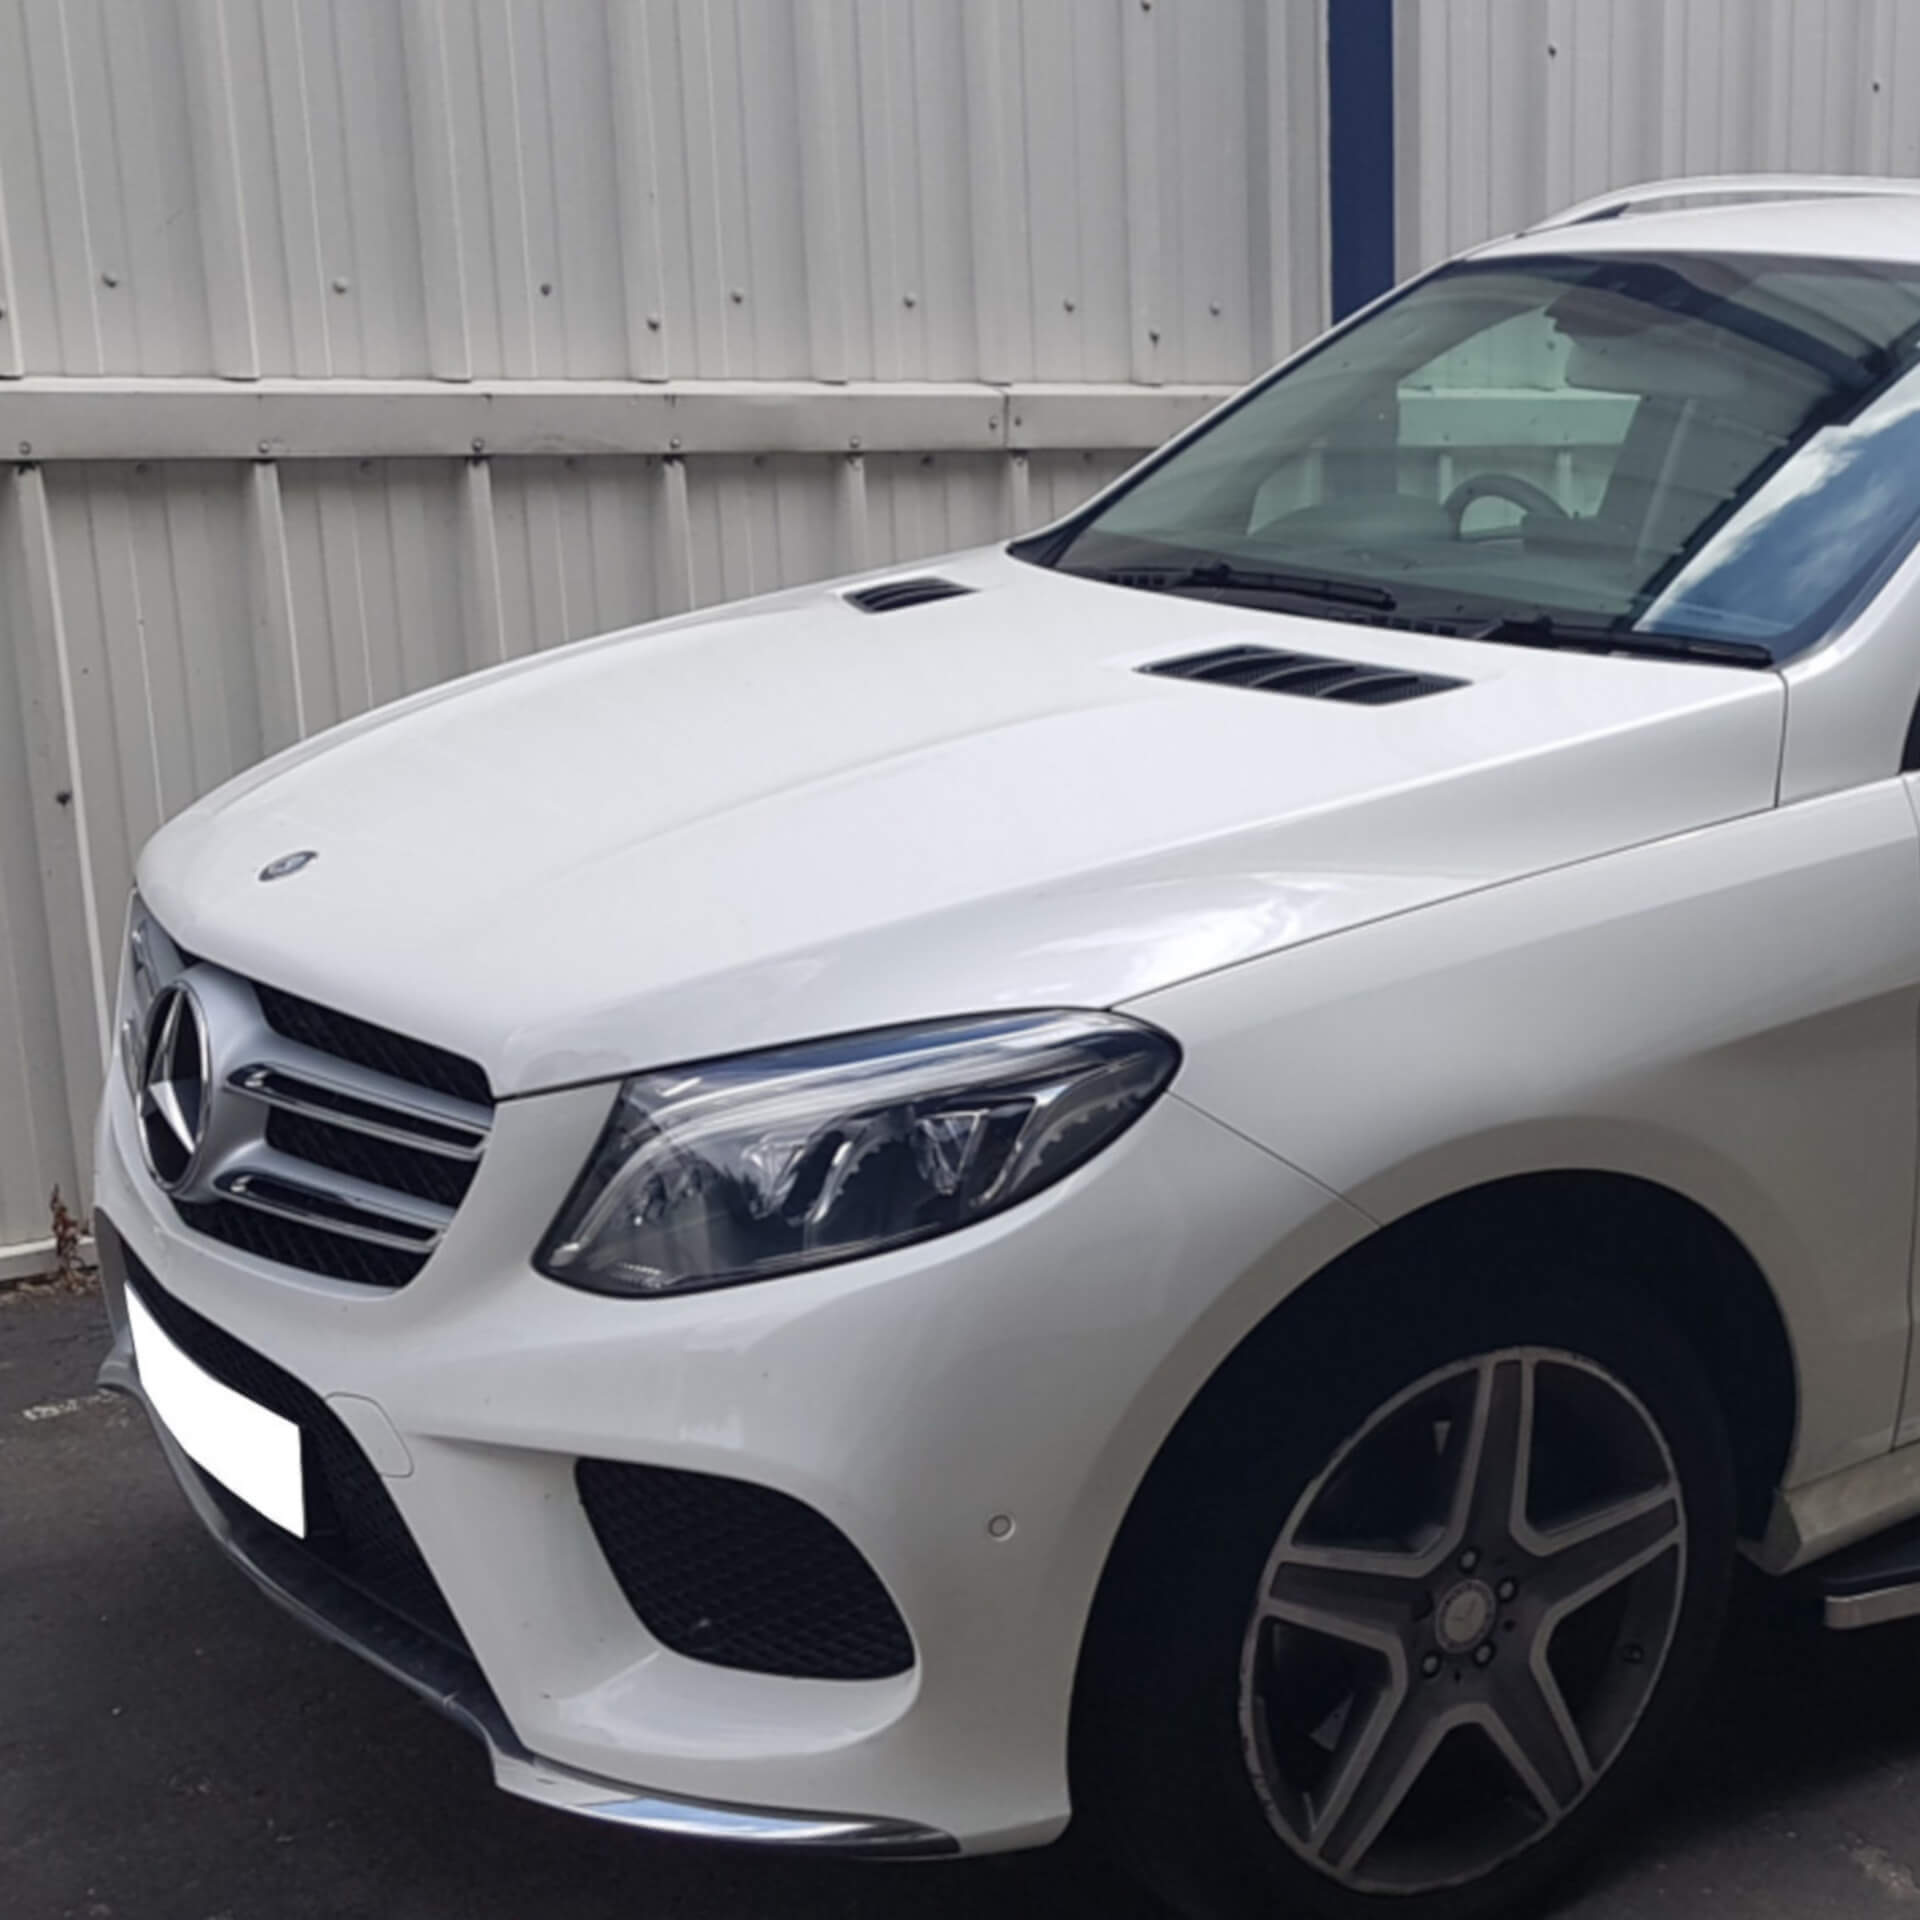 Direct4x4 accessories for Mercedes GLE vehicles with a photo of the front of a white Mercedes GLE